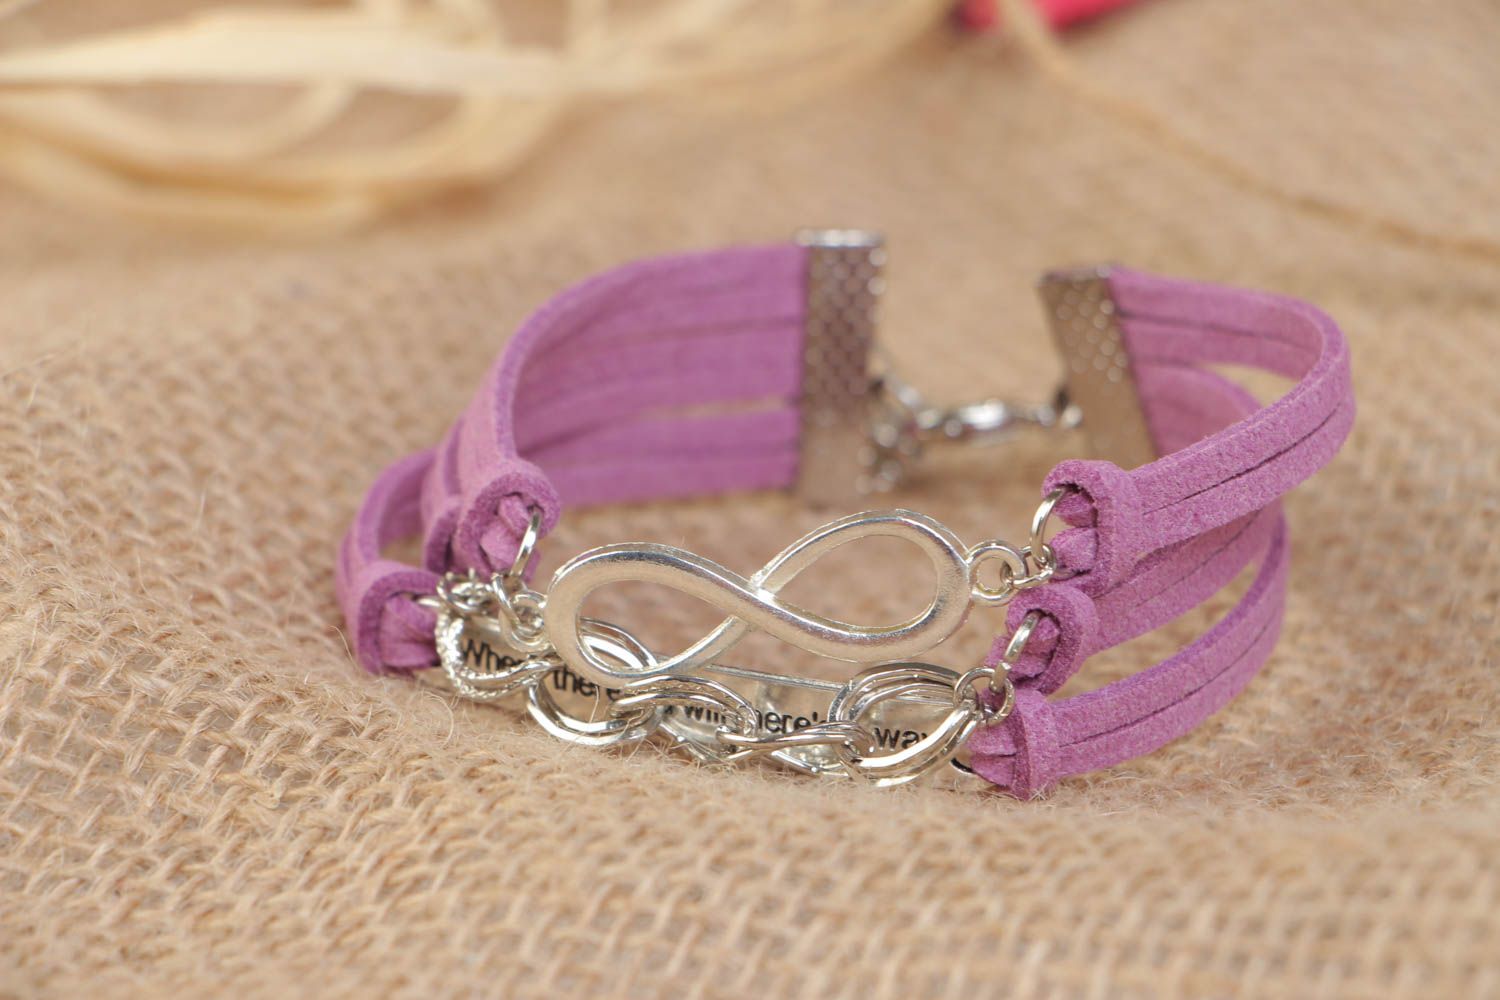 Handmade designer pink artificial suede cord bracelet with charms photo 1